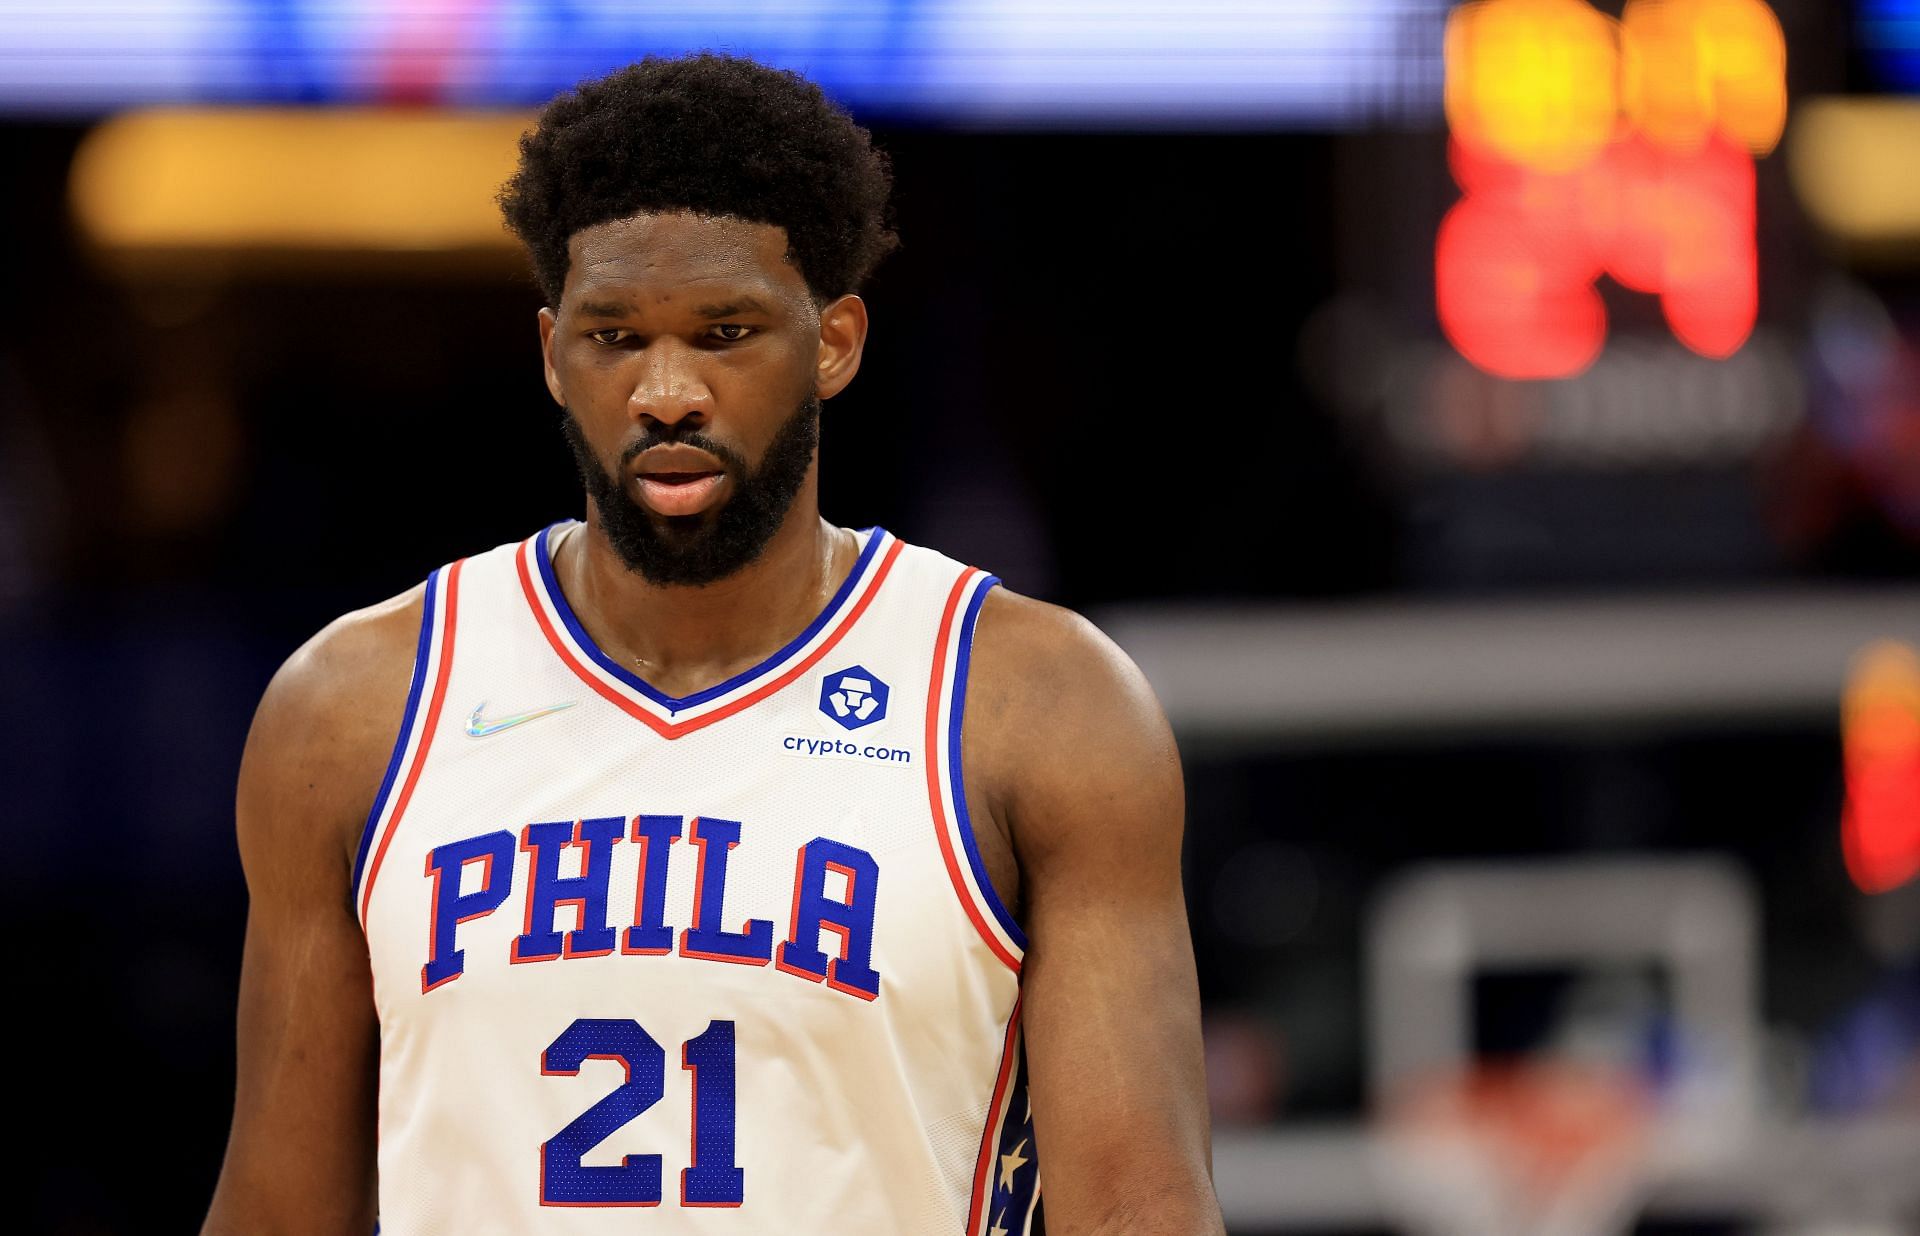 Joel Embiid #21 of the Philadelphia 76ers reacts to a play during a game against the Orlando Magic at Amway Center on January 05, 2022 in Orlando, Florida.